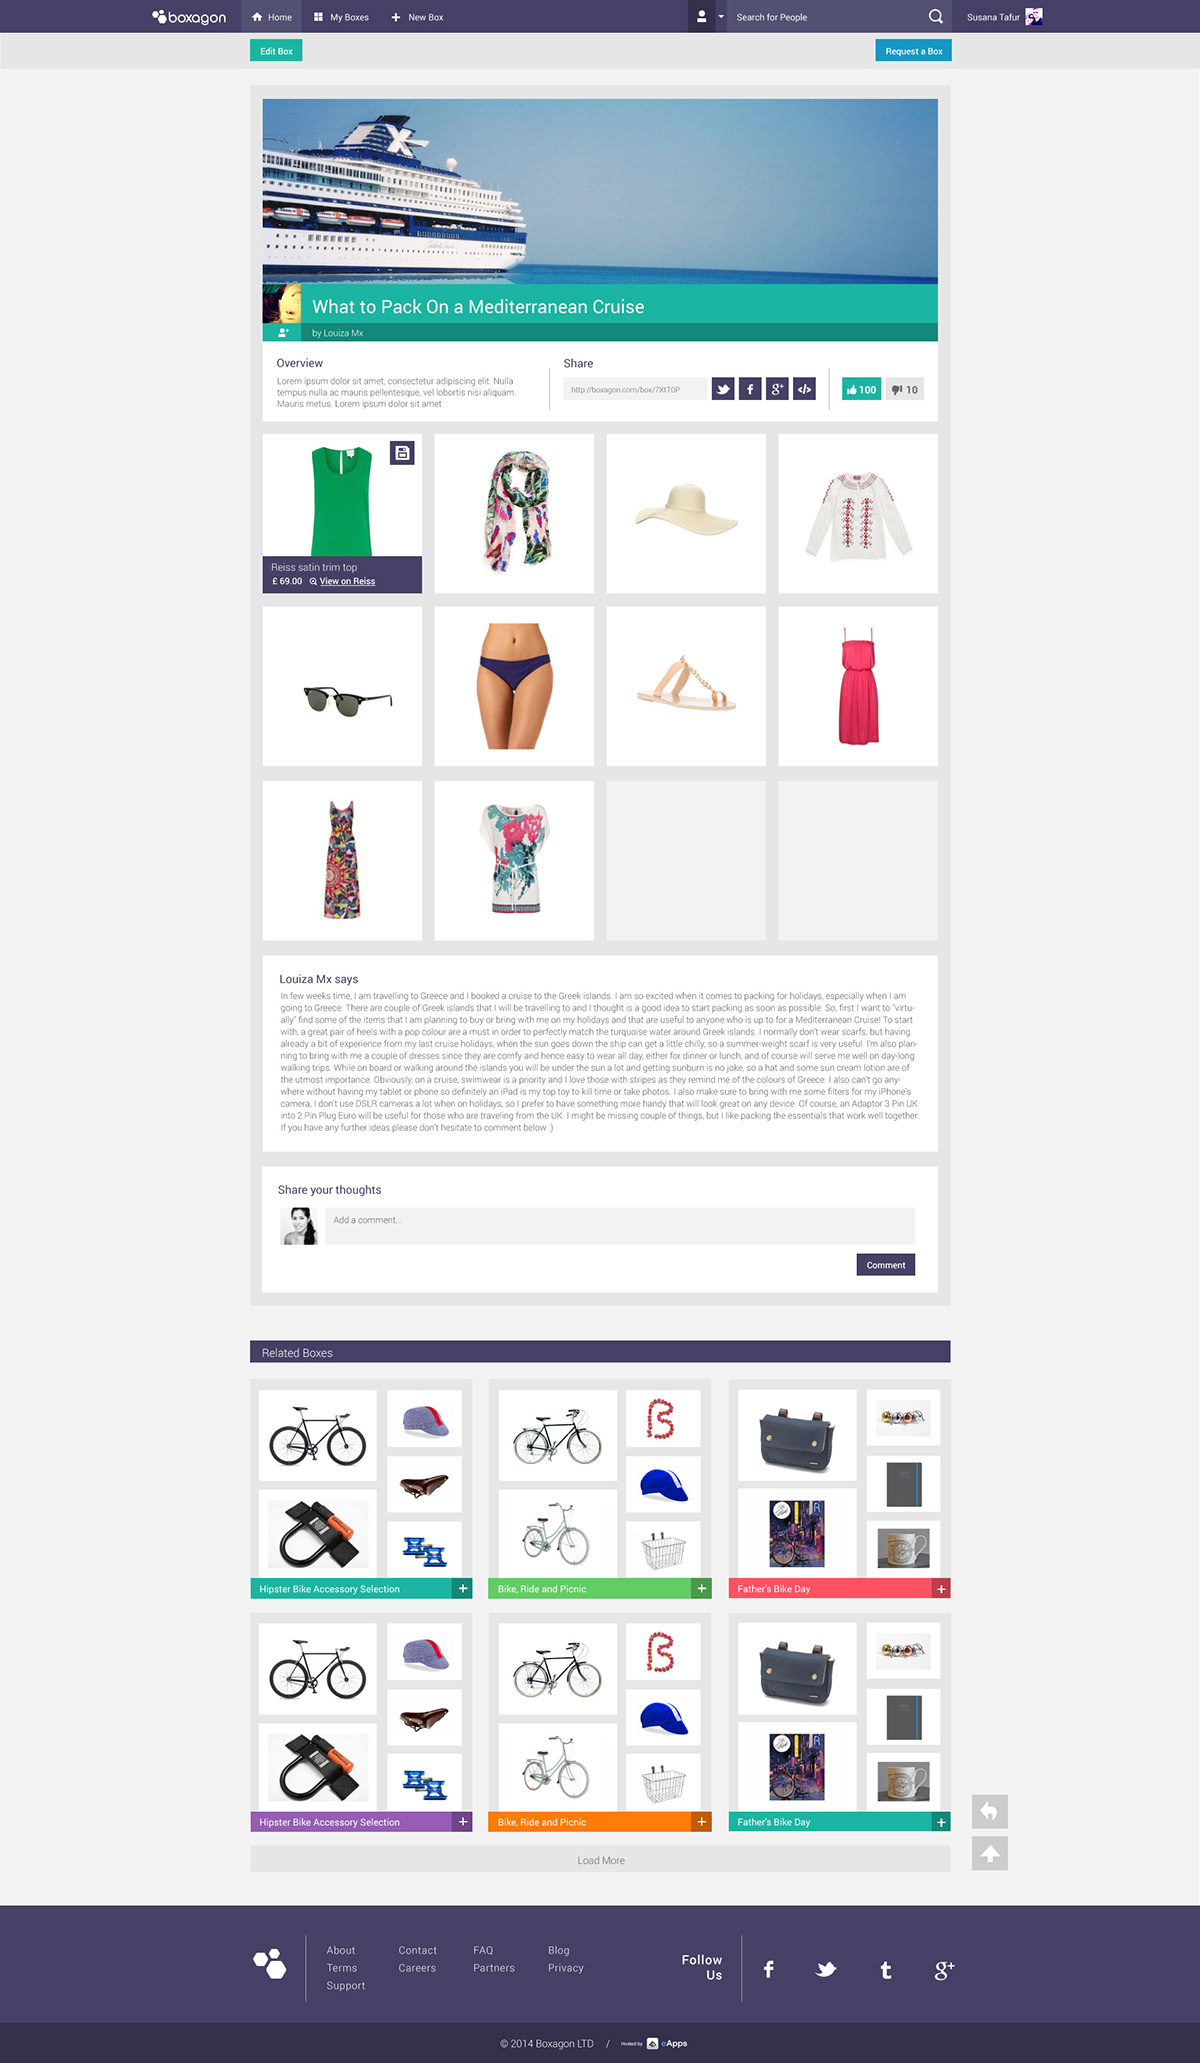 collections boxes lists products together community creating finding Create sports Items search seek Clothing app